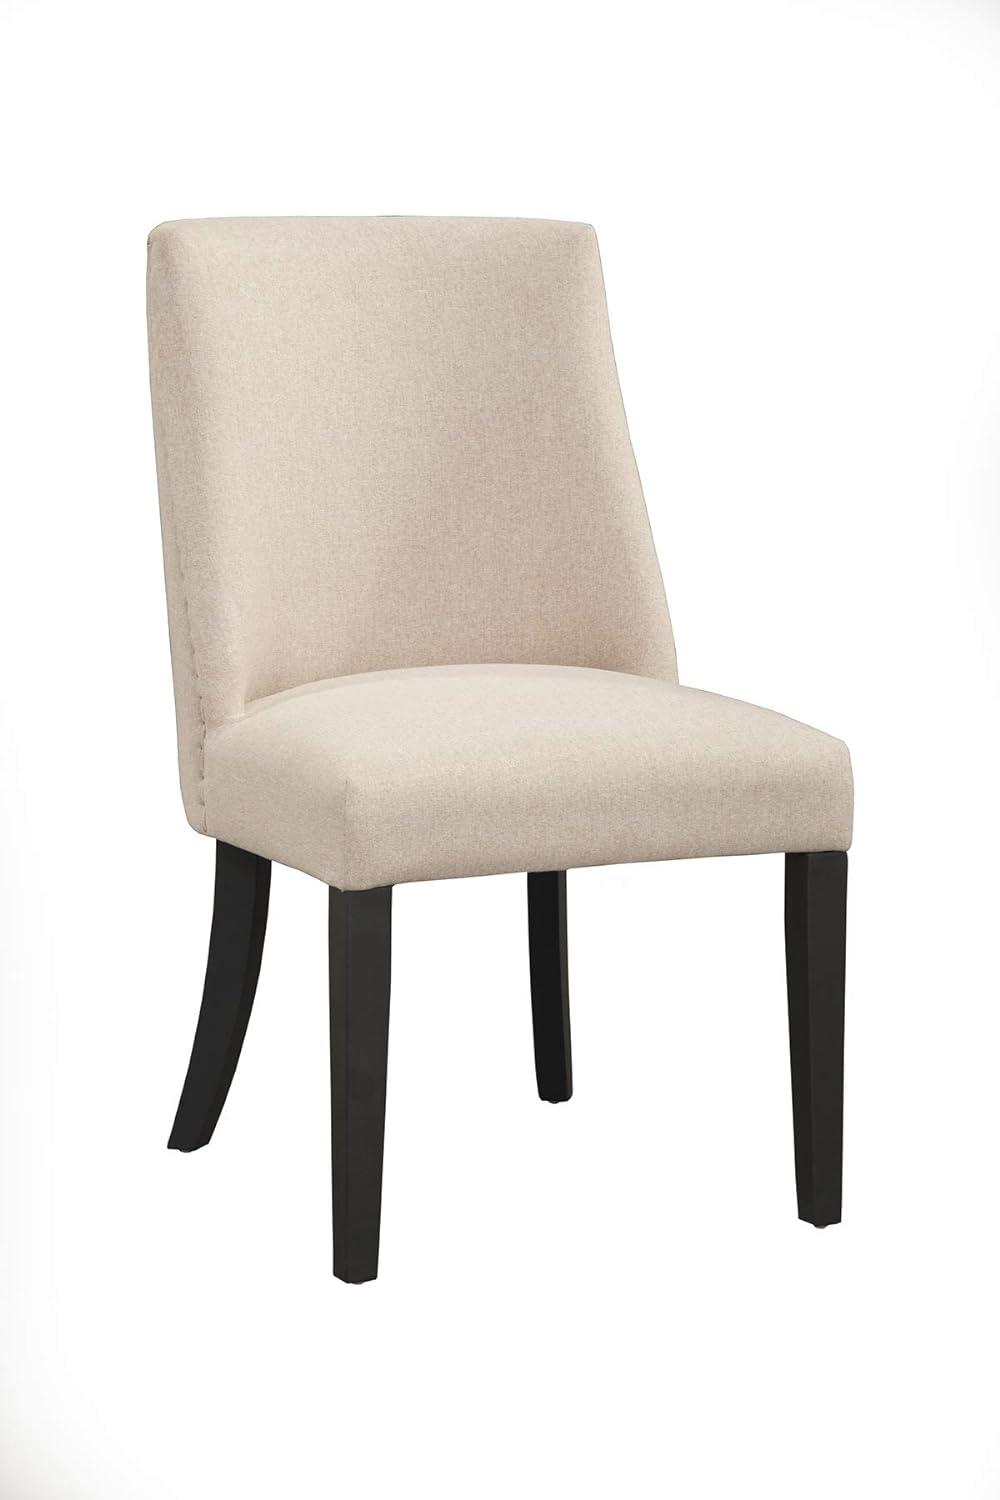 Cream Upholstered Parsons Side Chair with Black Wood Legs